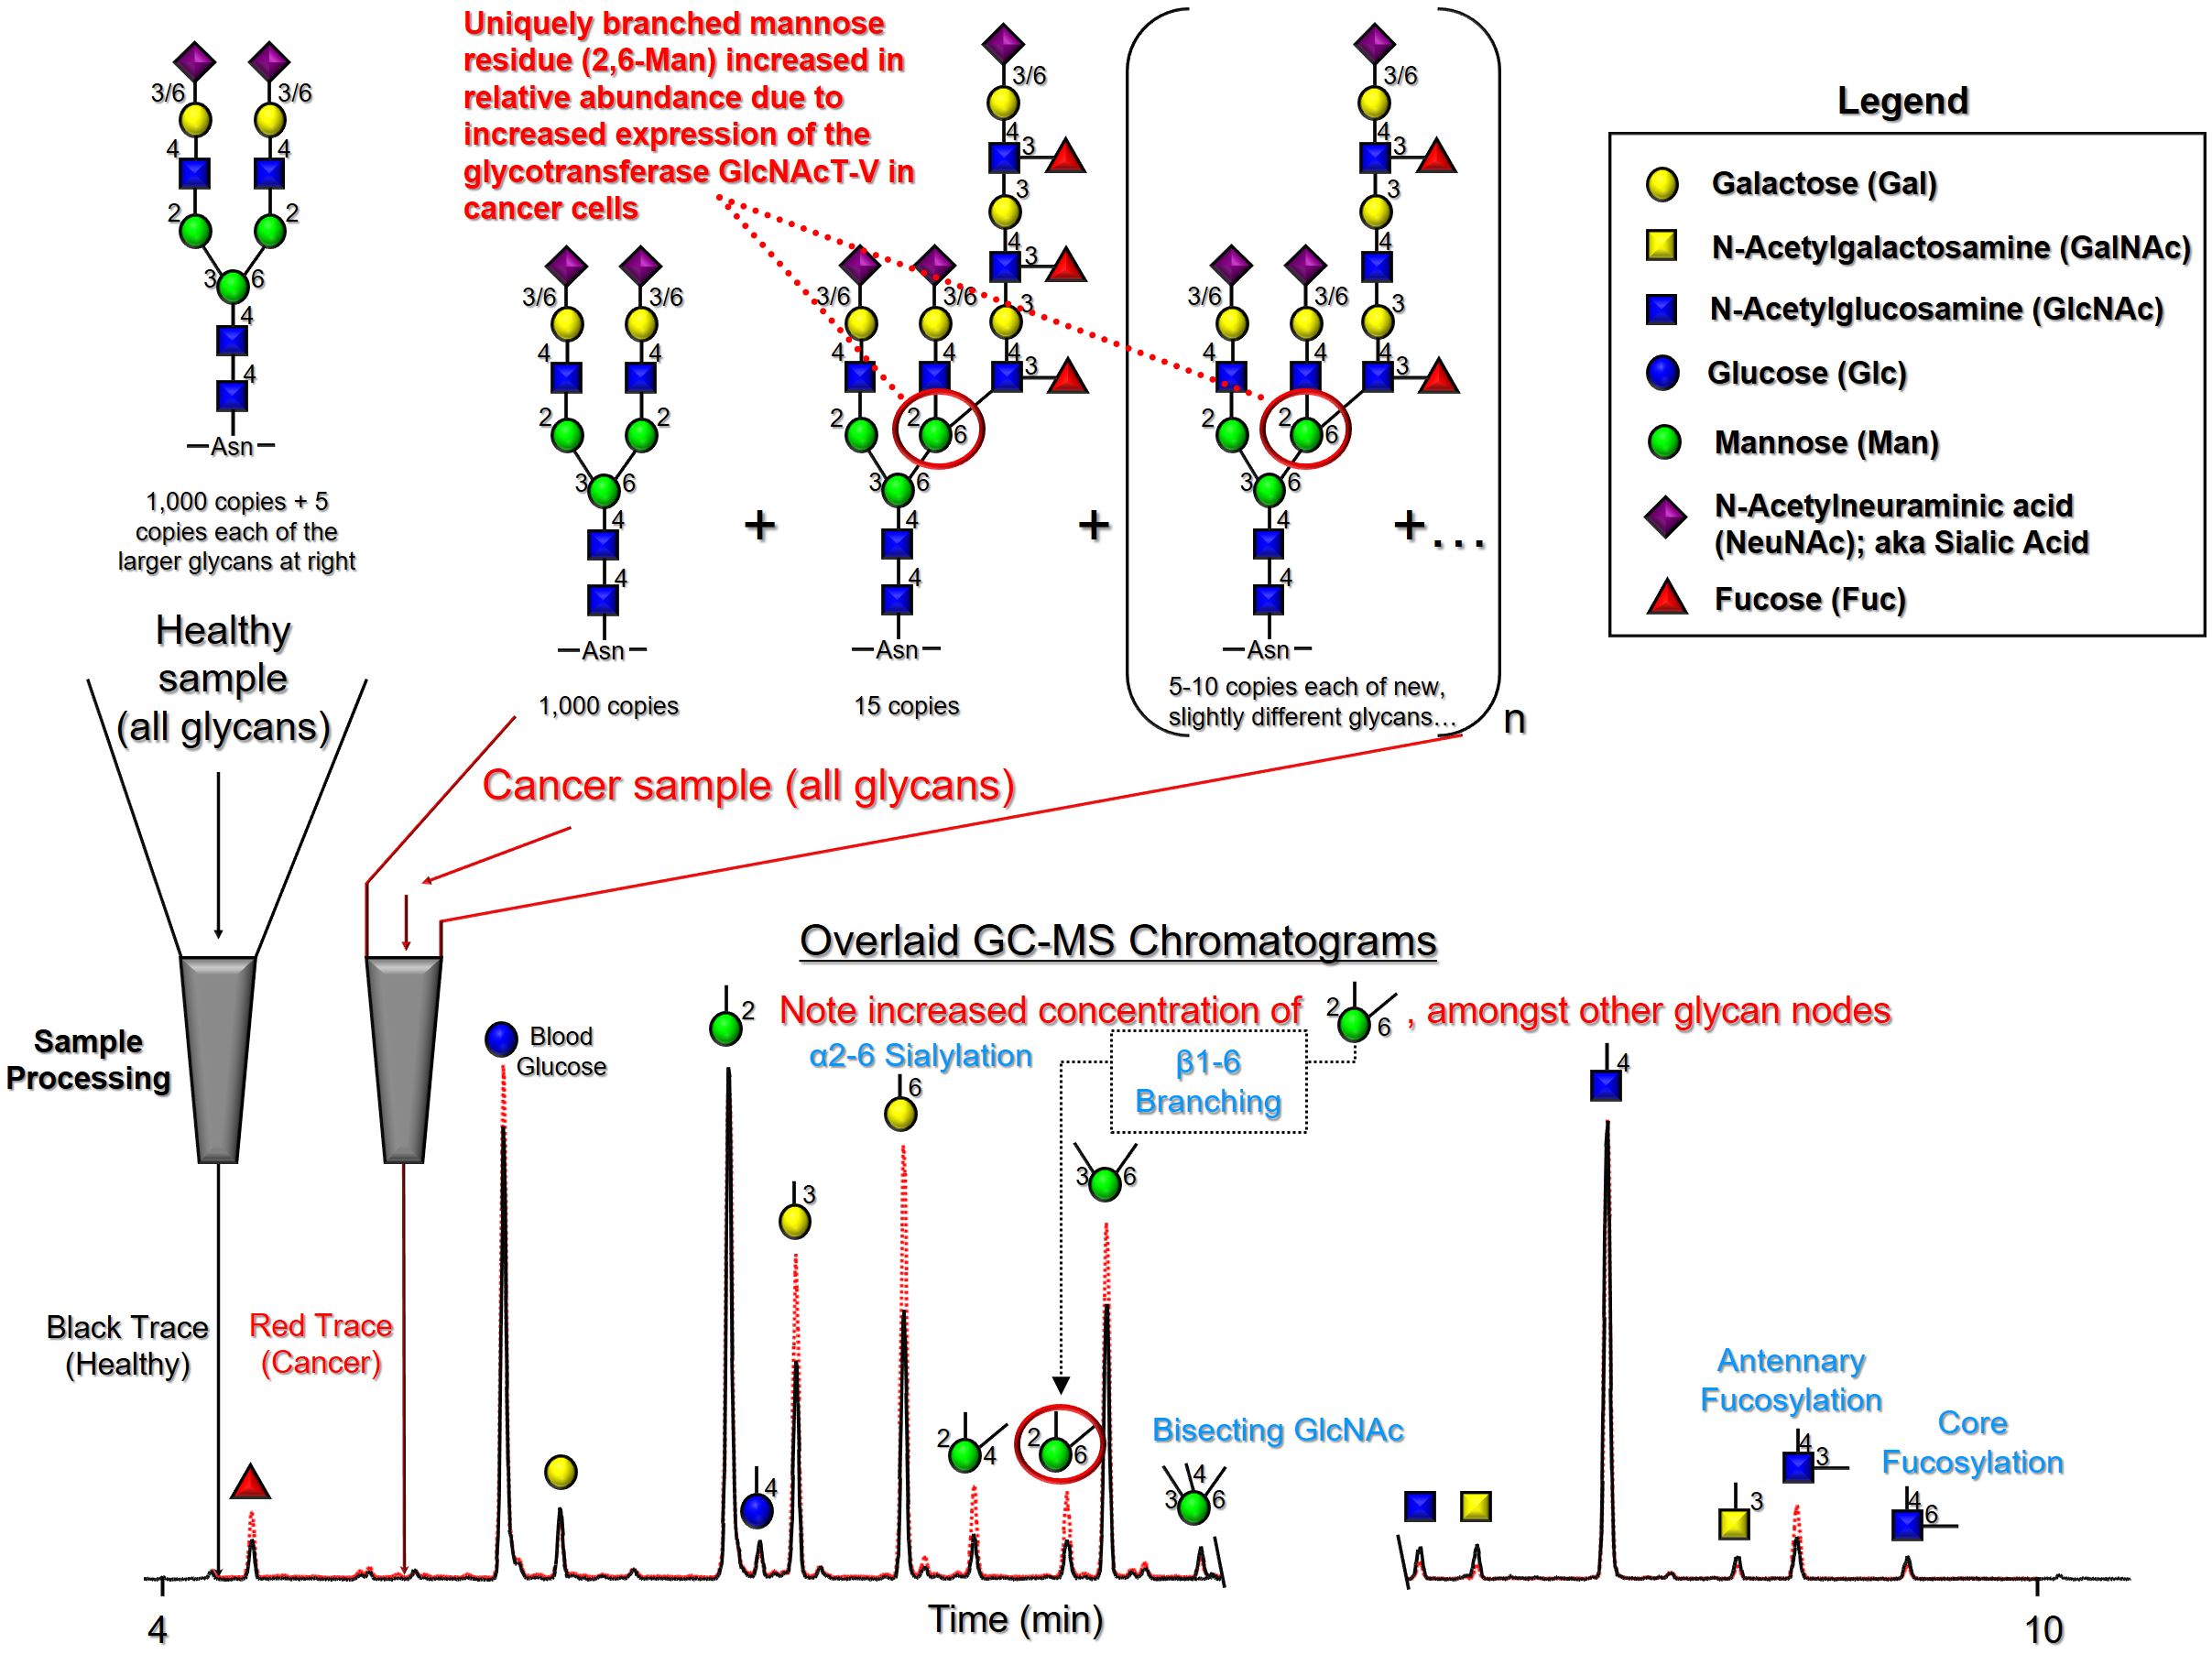 Glycan Node Analysis Summary Overview